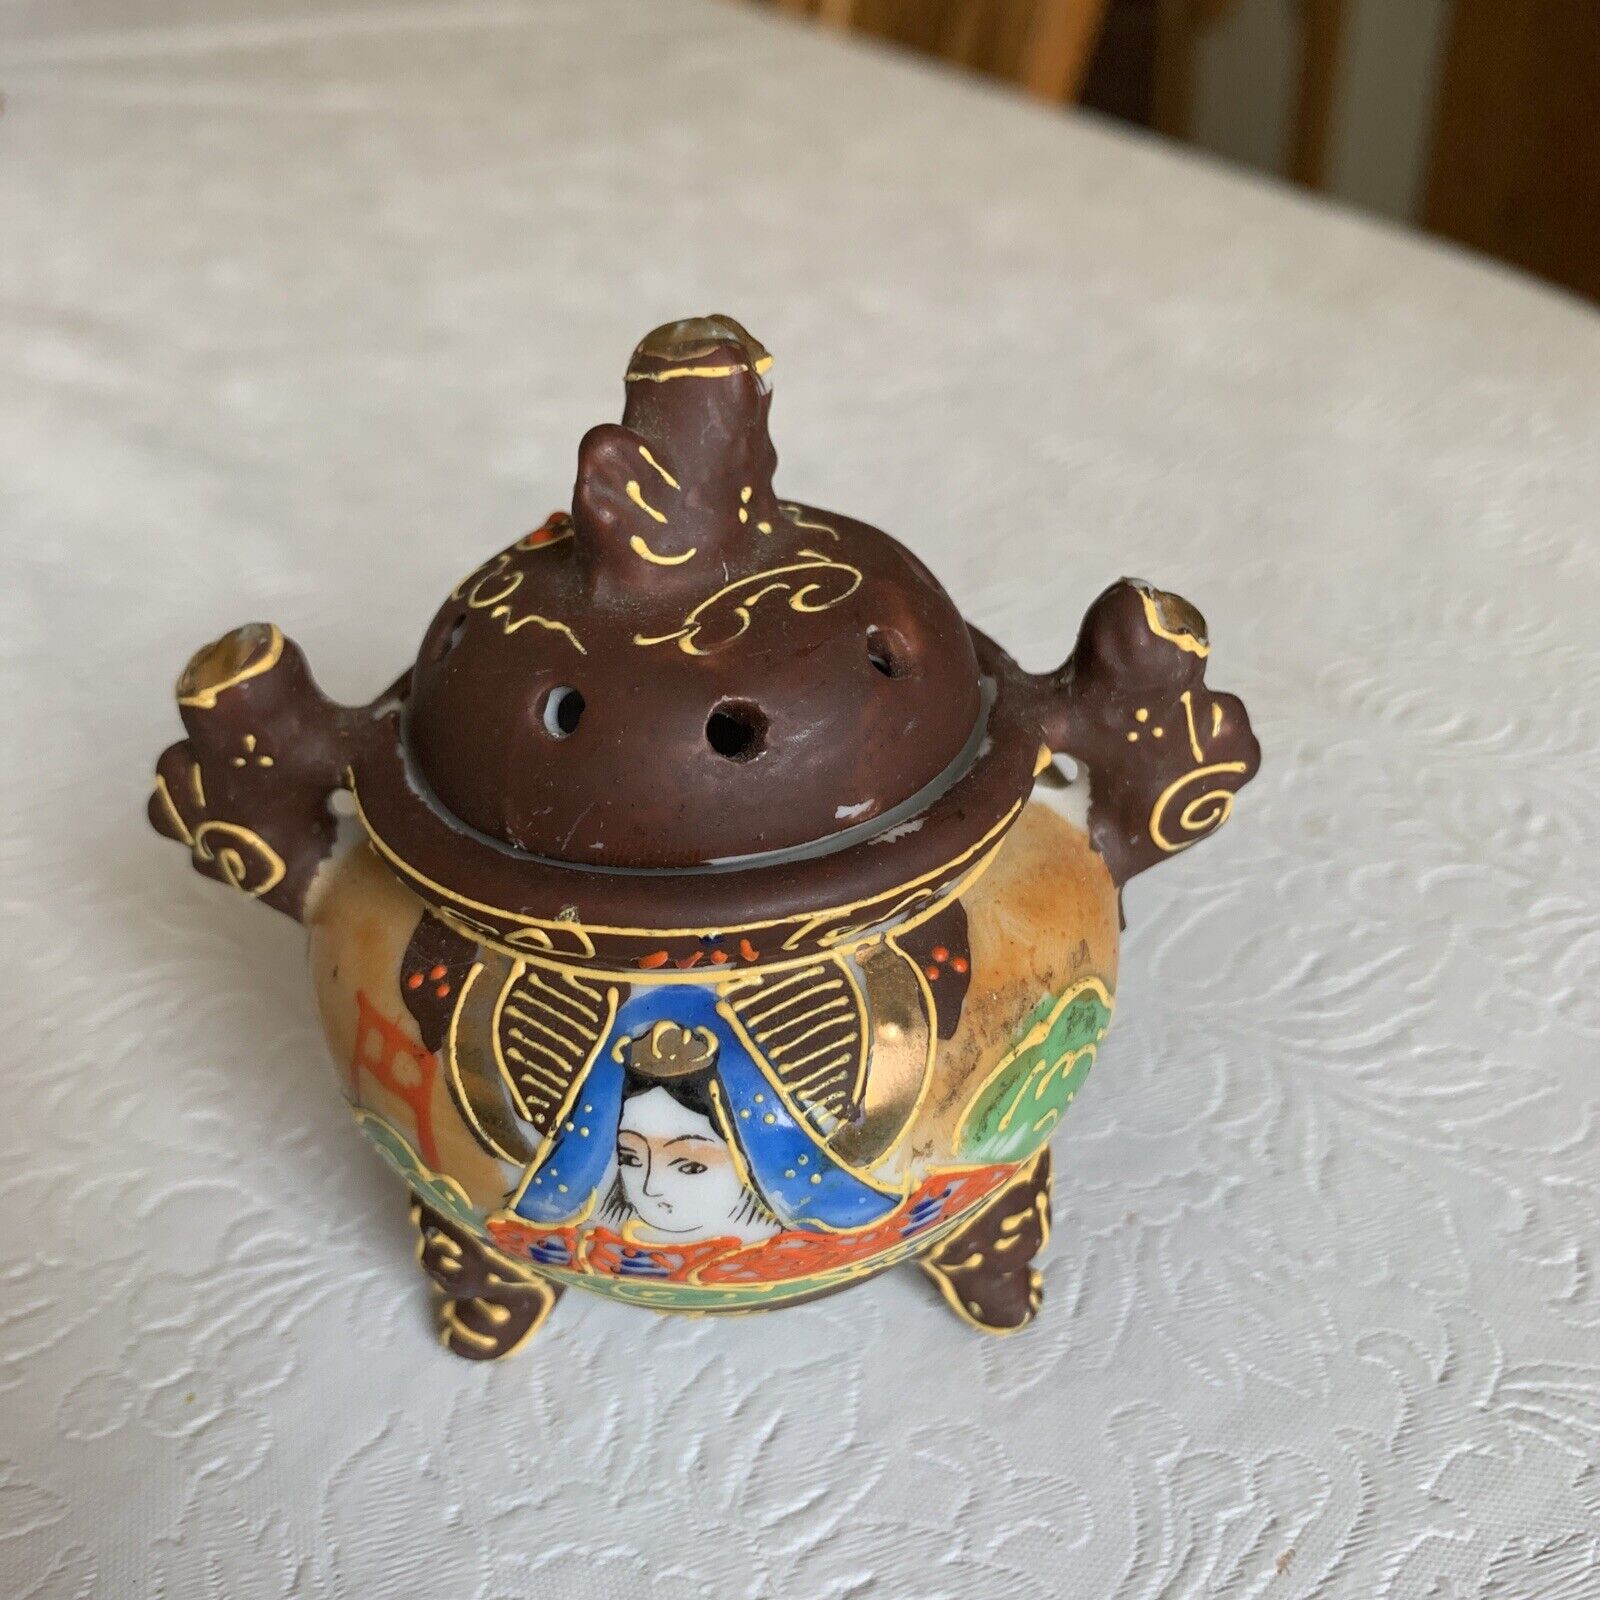 Small Oriental Container - Made in Japan - Possibly an Incense Burner